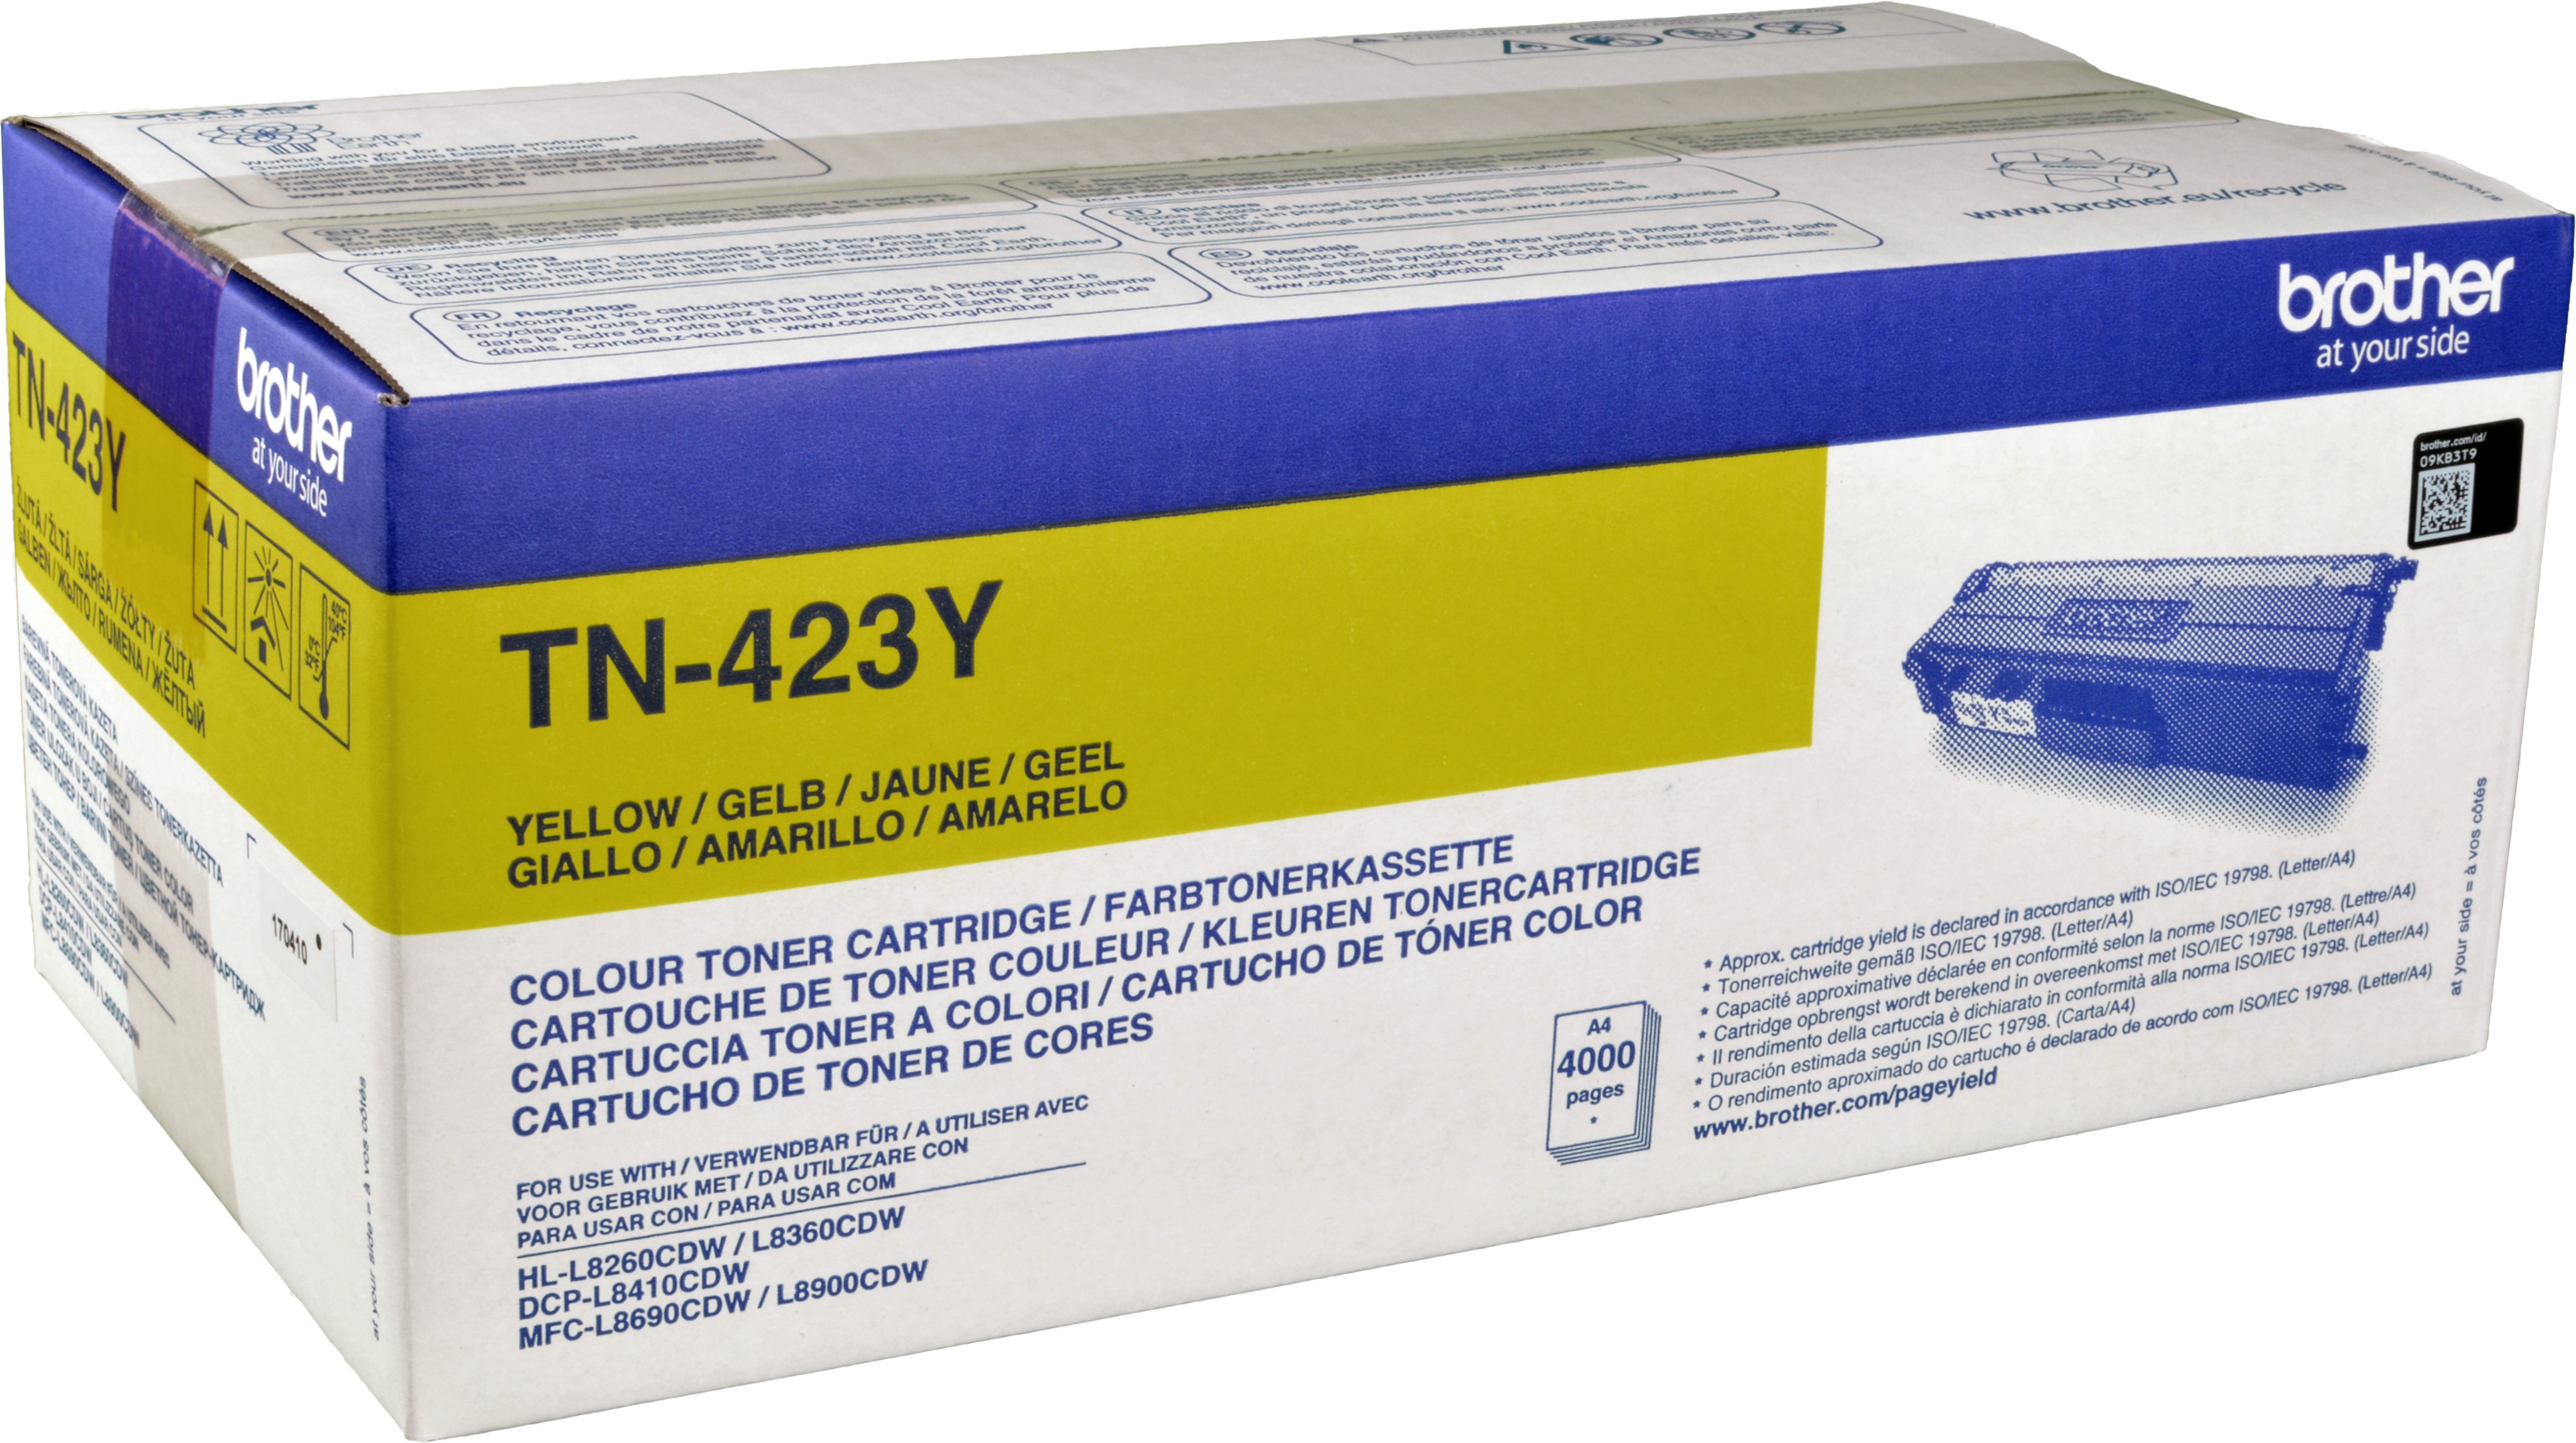 BROTHER (DR-421) Toner TN-423Y yellow